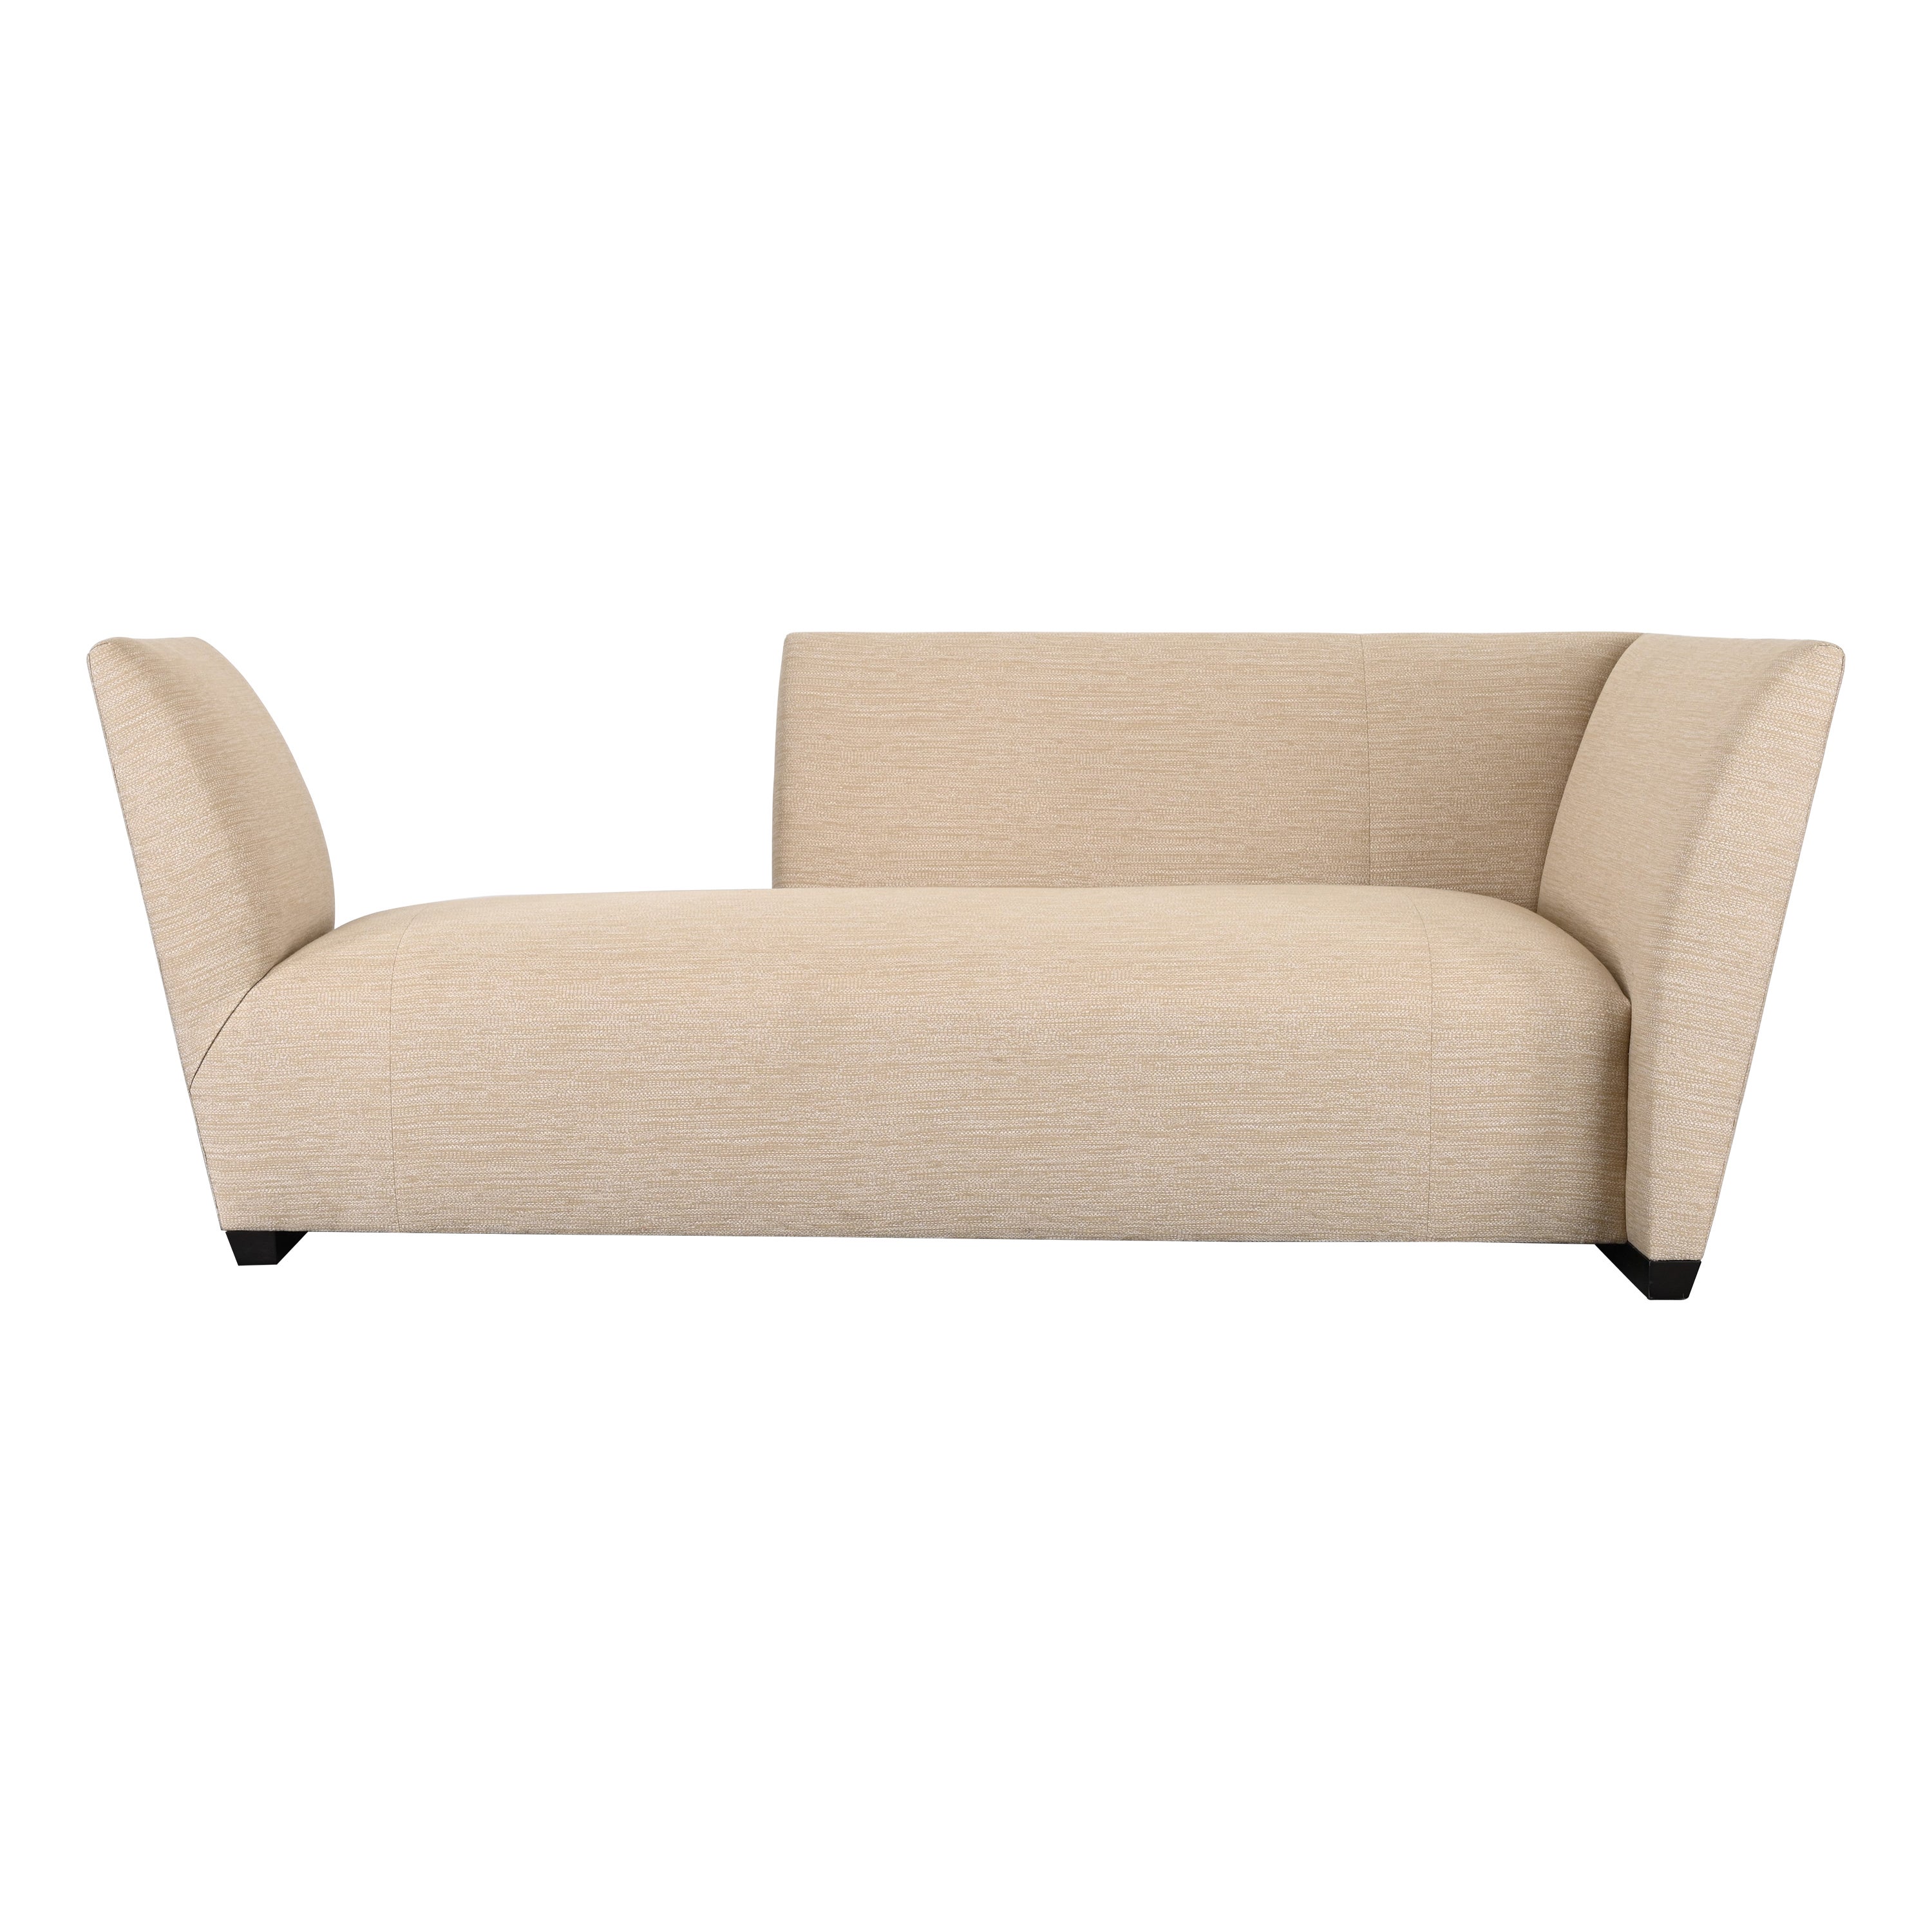 Island Sofa or Chaise Lounge by Joe D'Urso for Donghia, 1990s For Sale